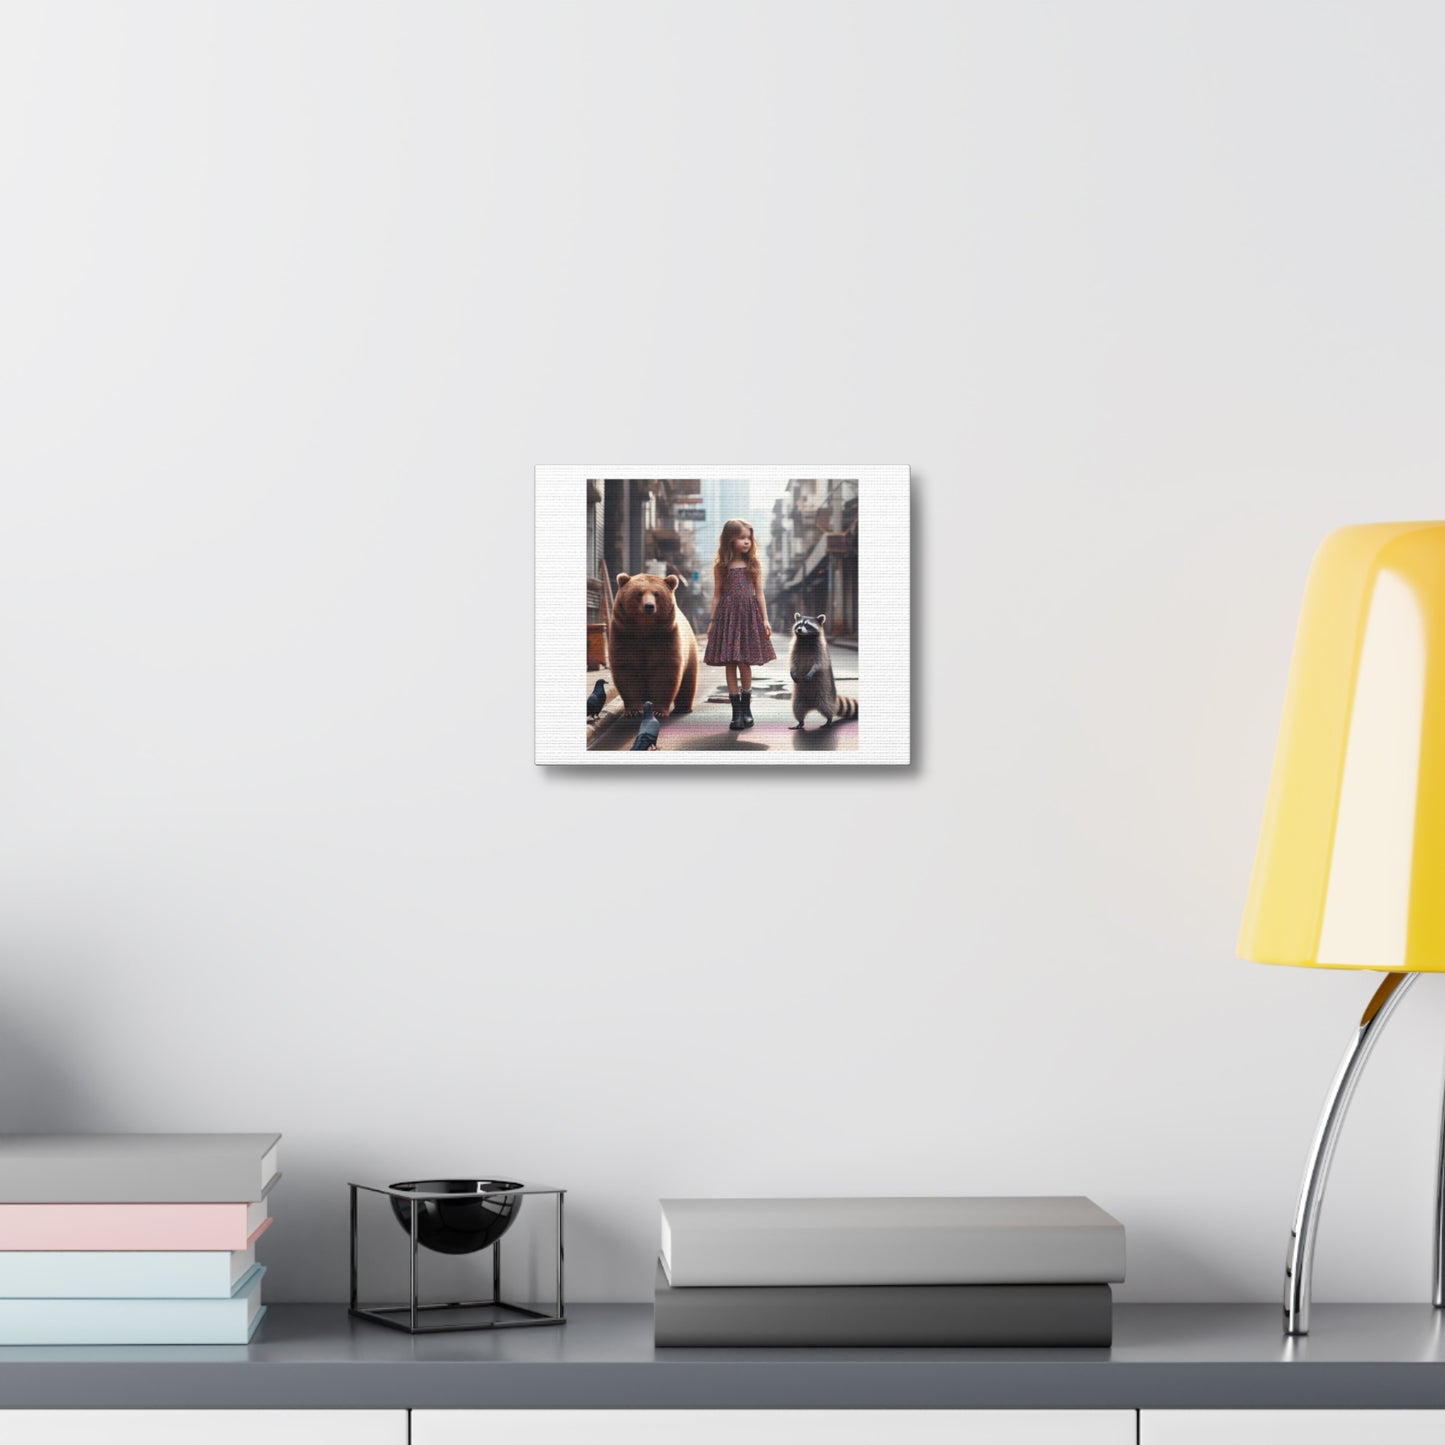 Your Vibe Attracts Your Tribe, Art Print 'Designed by AI' on Canvas